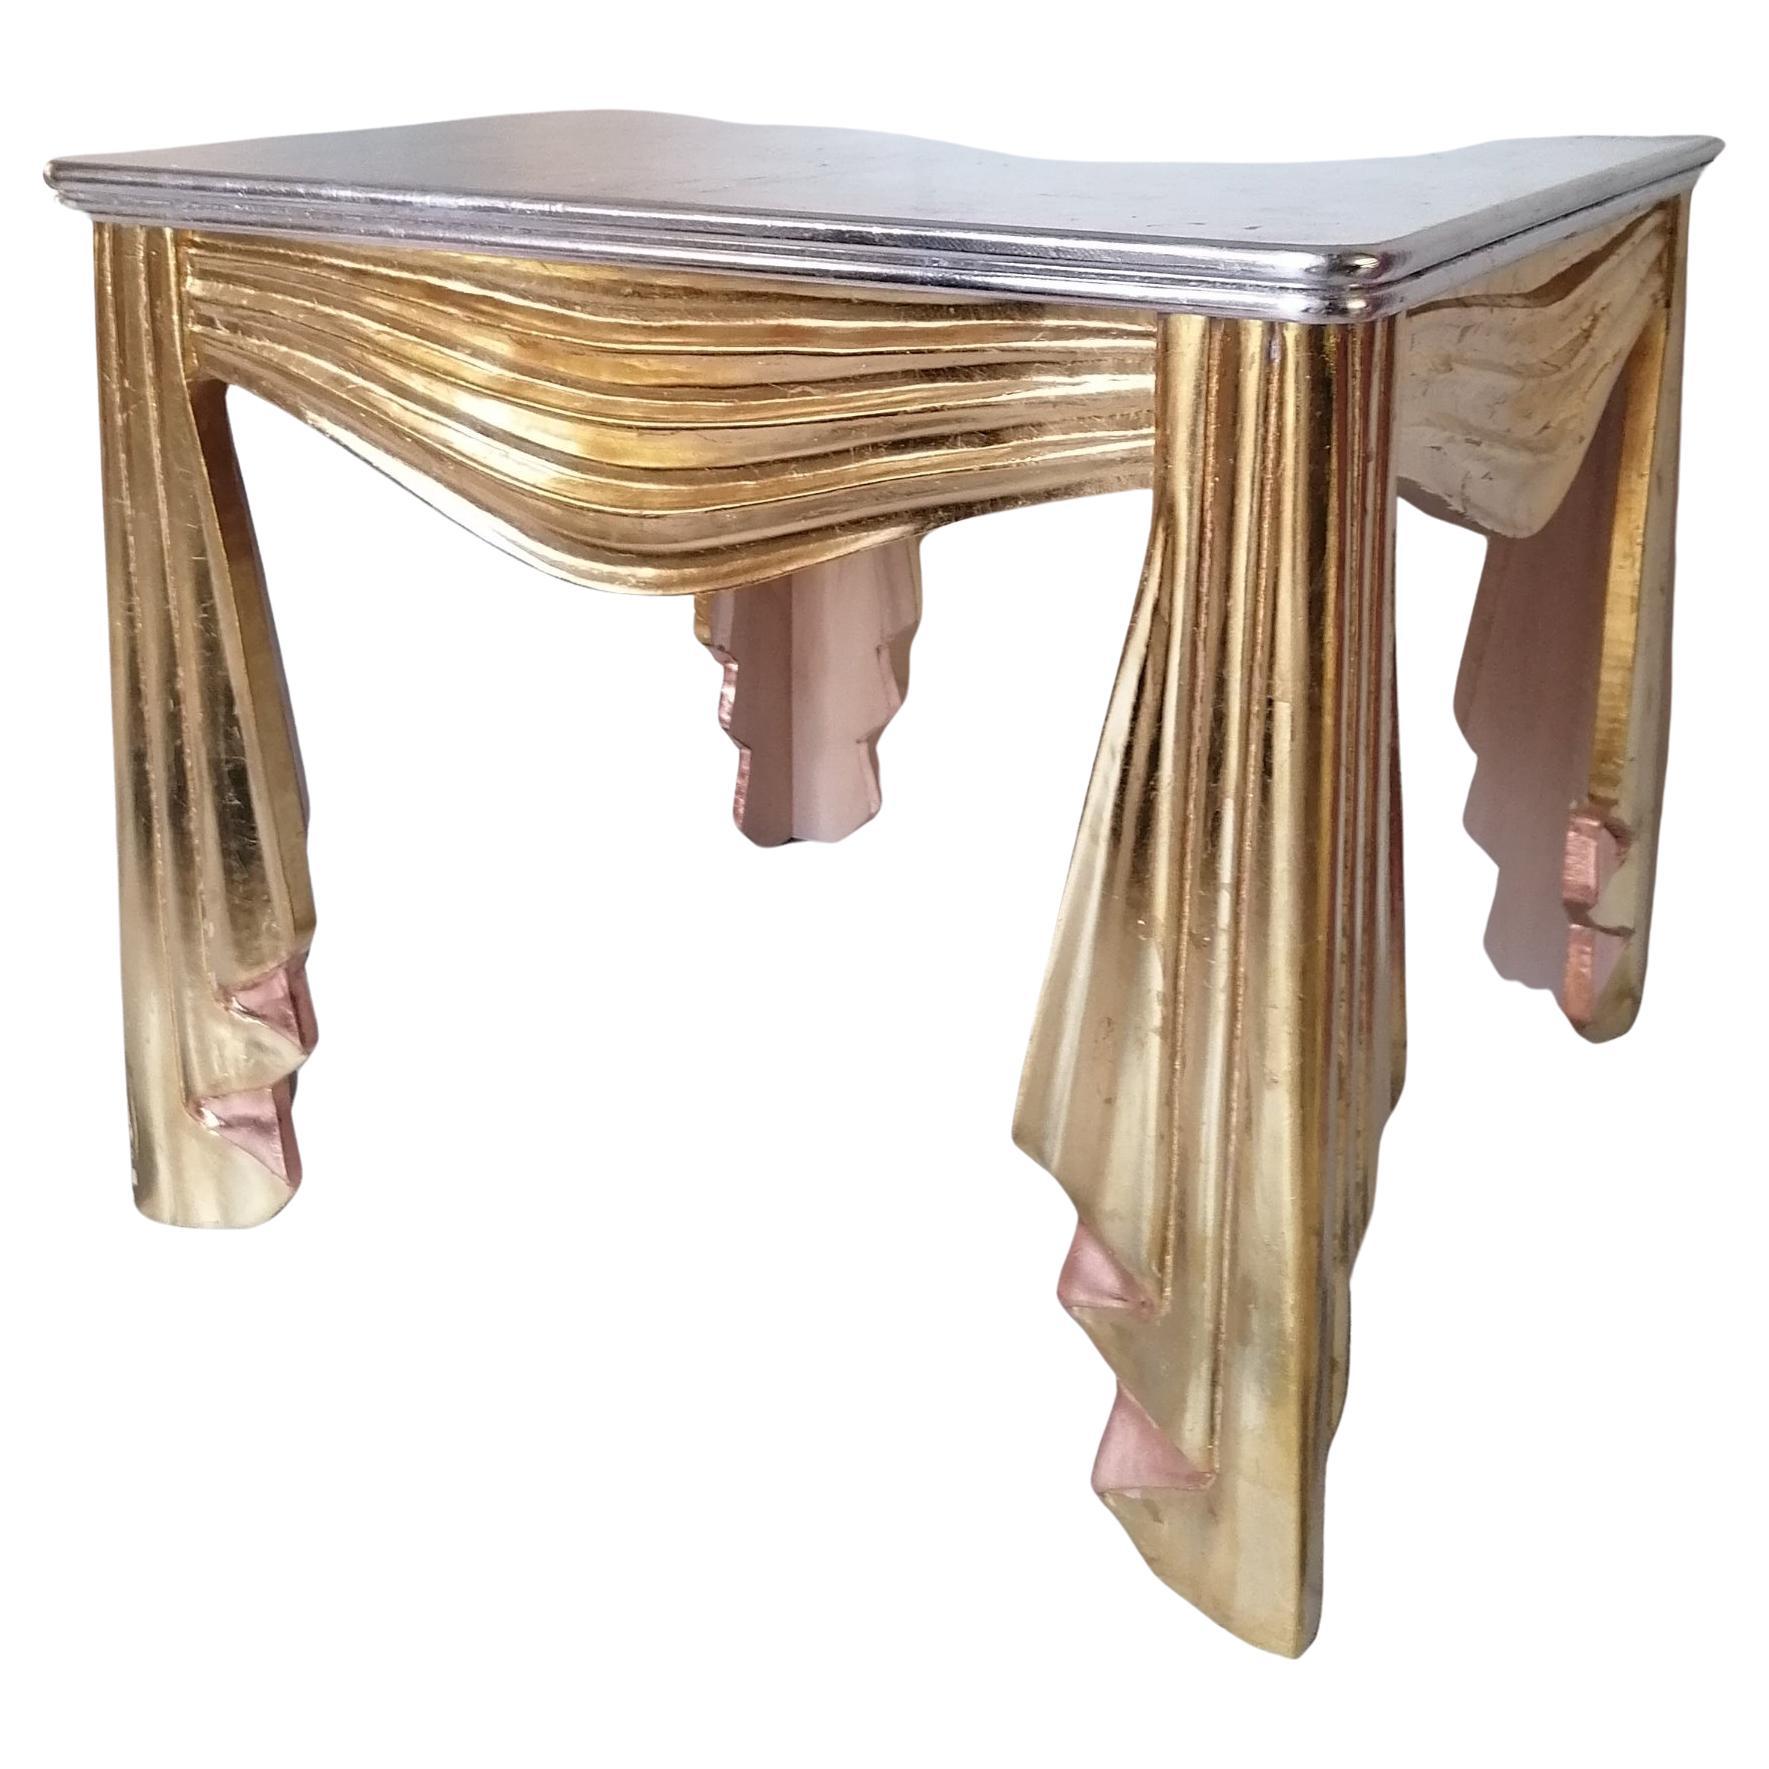 Decorative Hollywood Regency gilded carved wood table in the form of swagged & ruched fabric. Silver gilt top. USA, 1960s / 70s. There's some age-related to the finish in places, but overall looks great.

Dimensions: width 69cm, depth 69cm, height